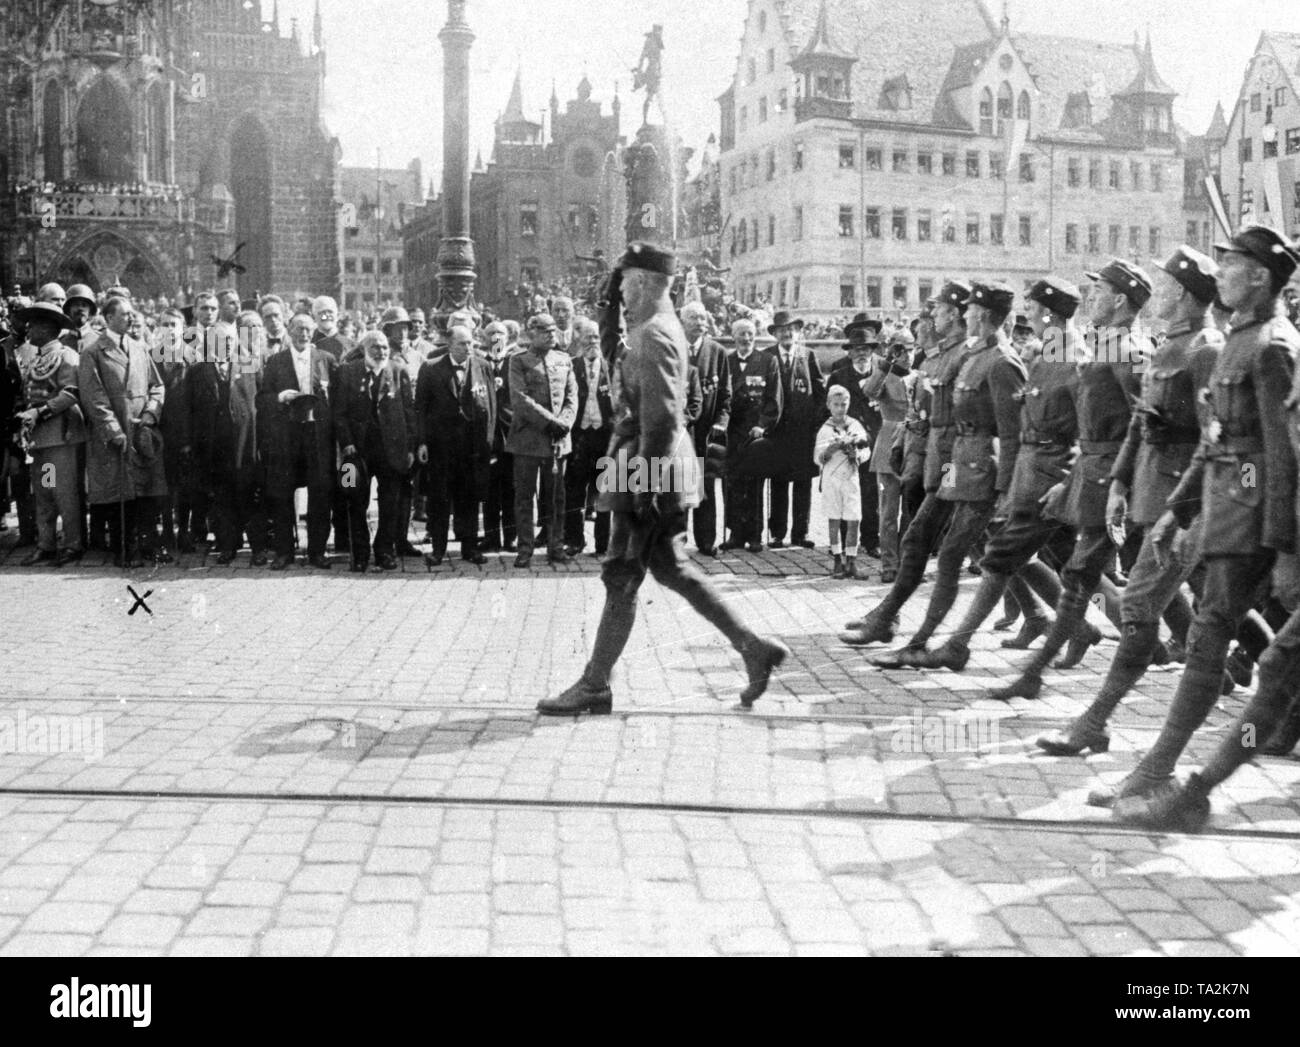 Adolf Hitler (3rd from left) and right behind him presumably Ernst Roehm watch the march past of an SA unit in front of the Frauenkirche in Nuremberg. Stock Photo